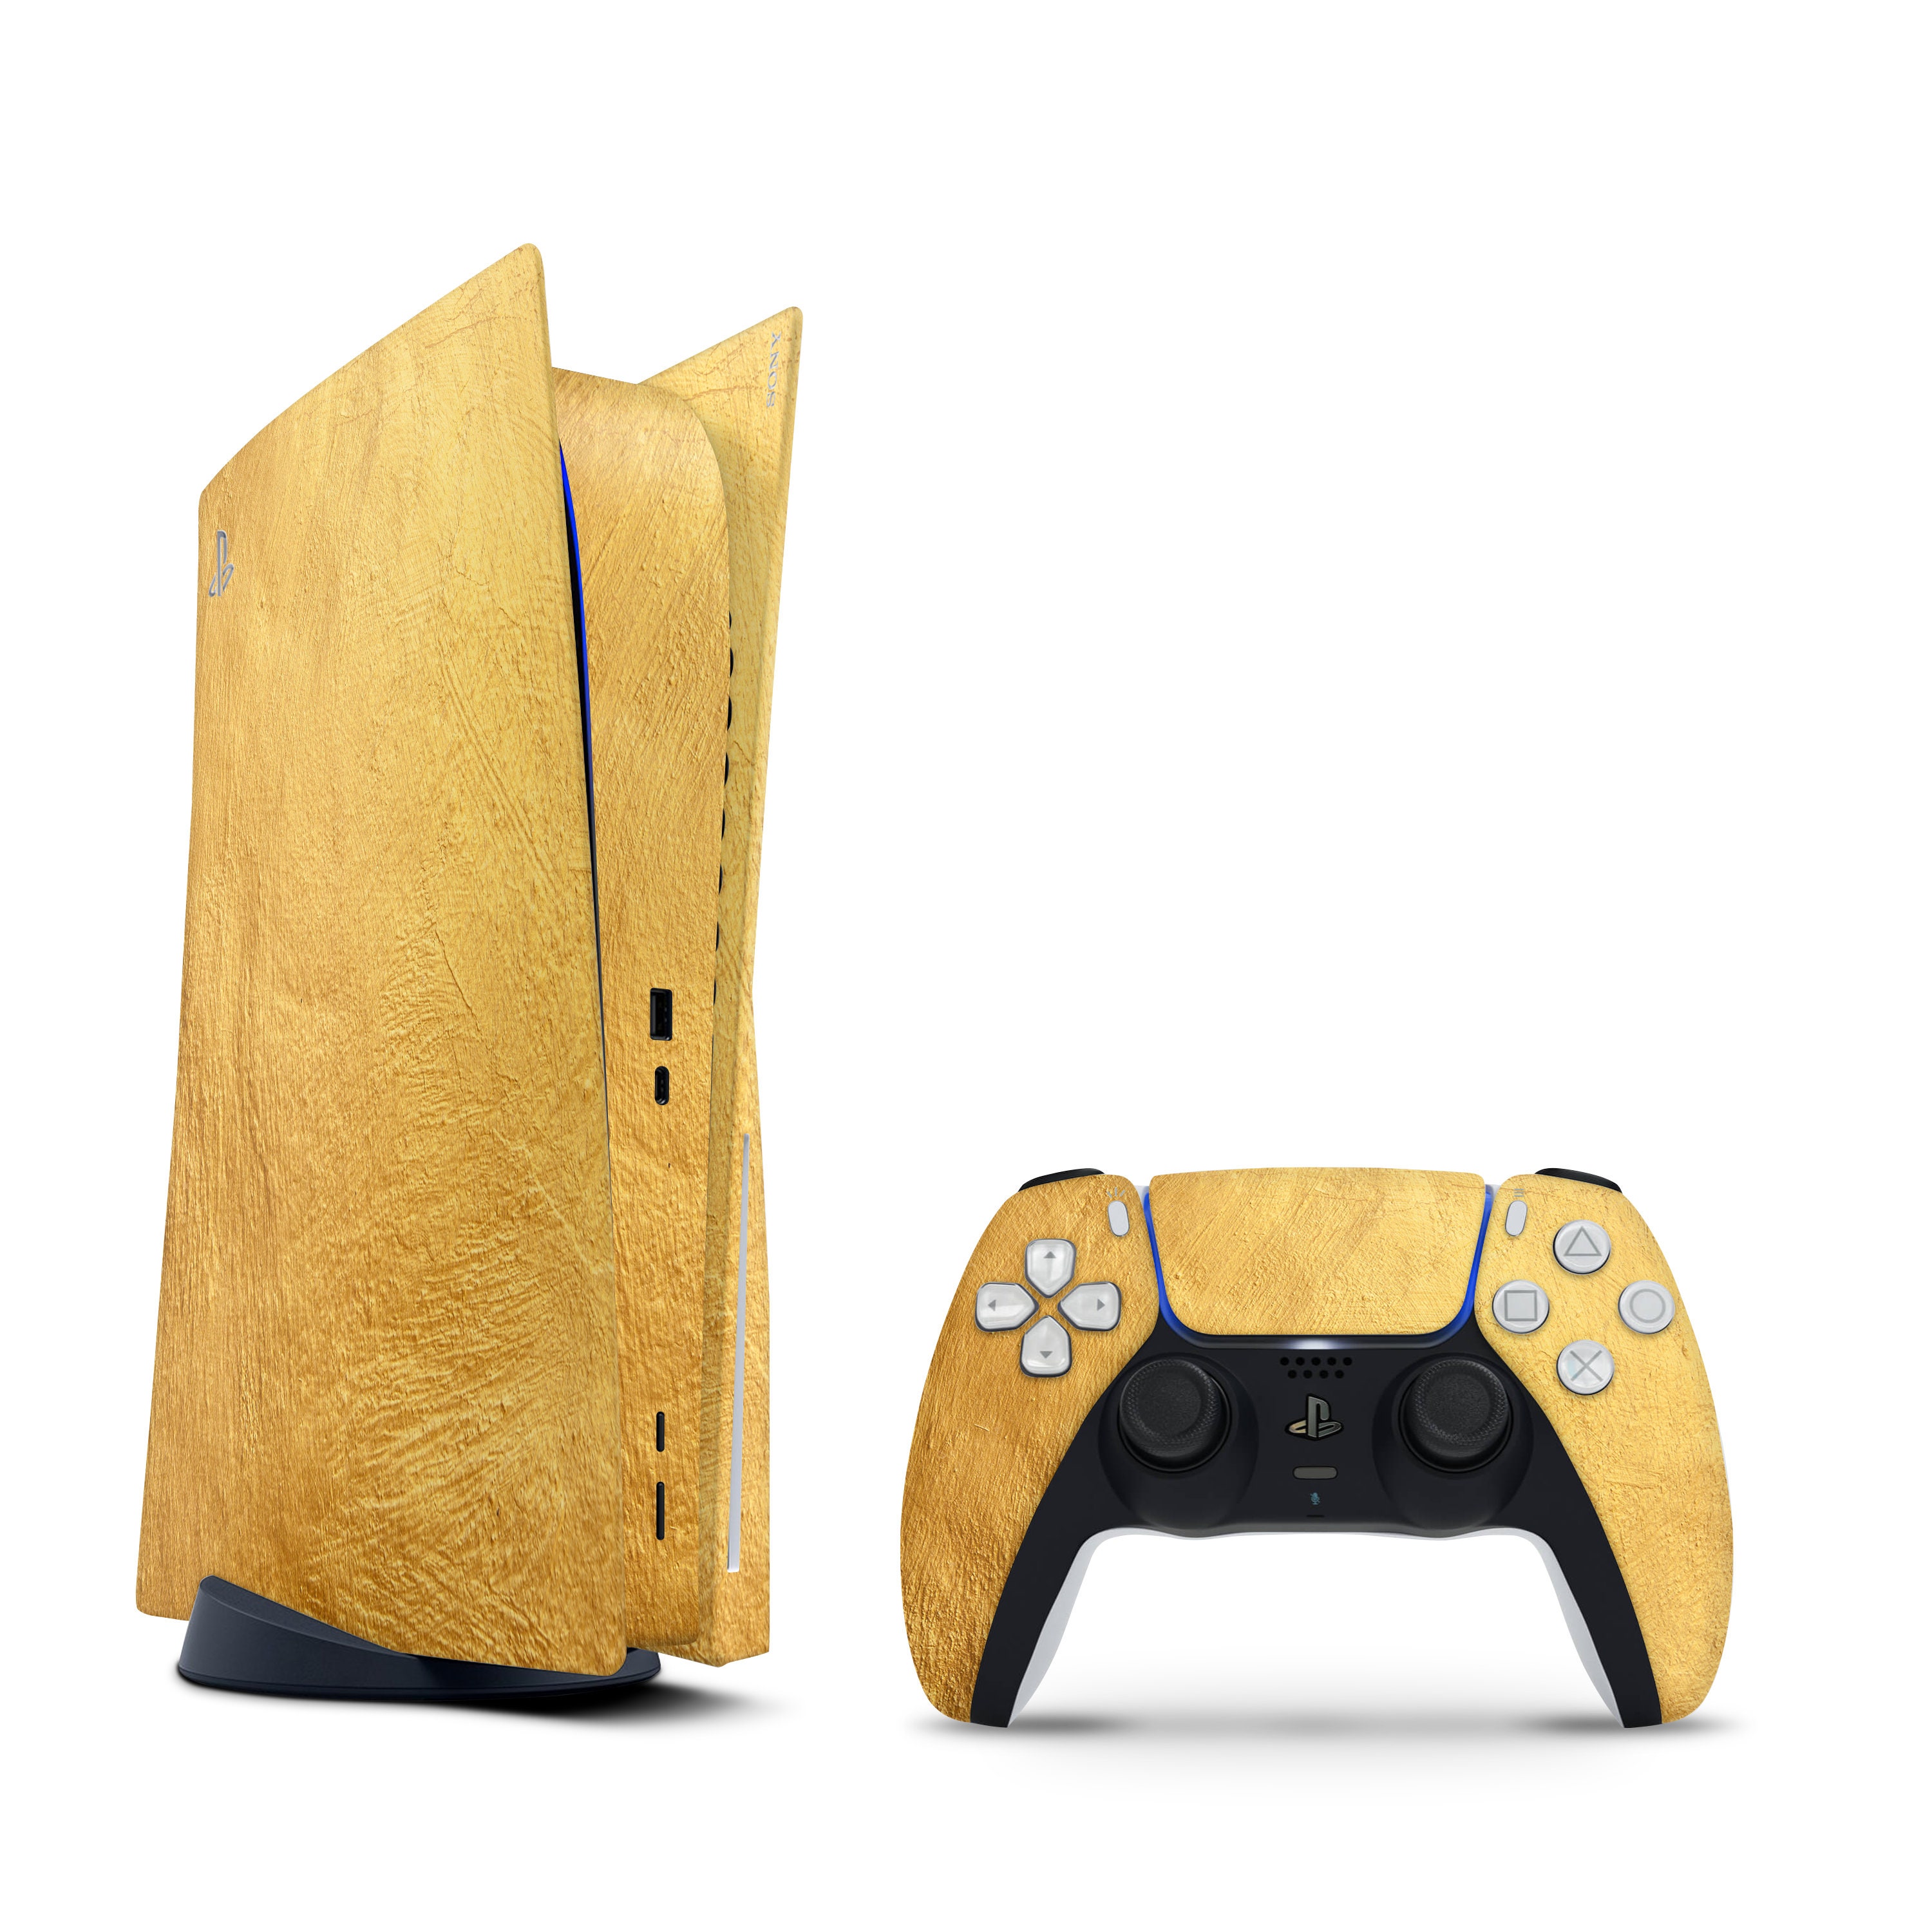 Cobalt Golden Skin Decal For PS5 Playstation 5 Console And Controller ,  Full Wrap Vinyl For PS5